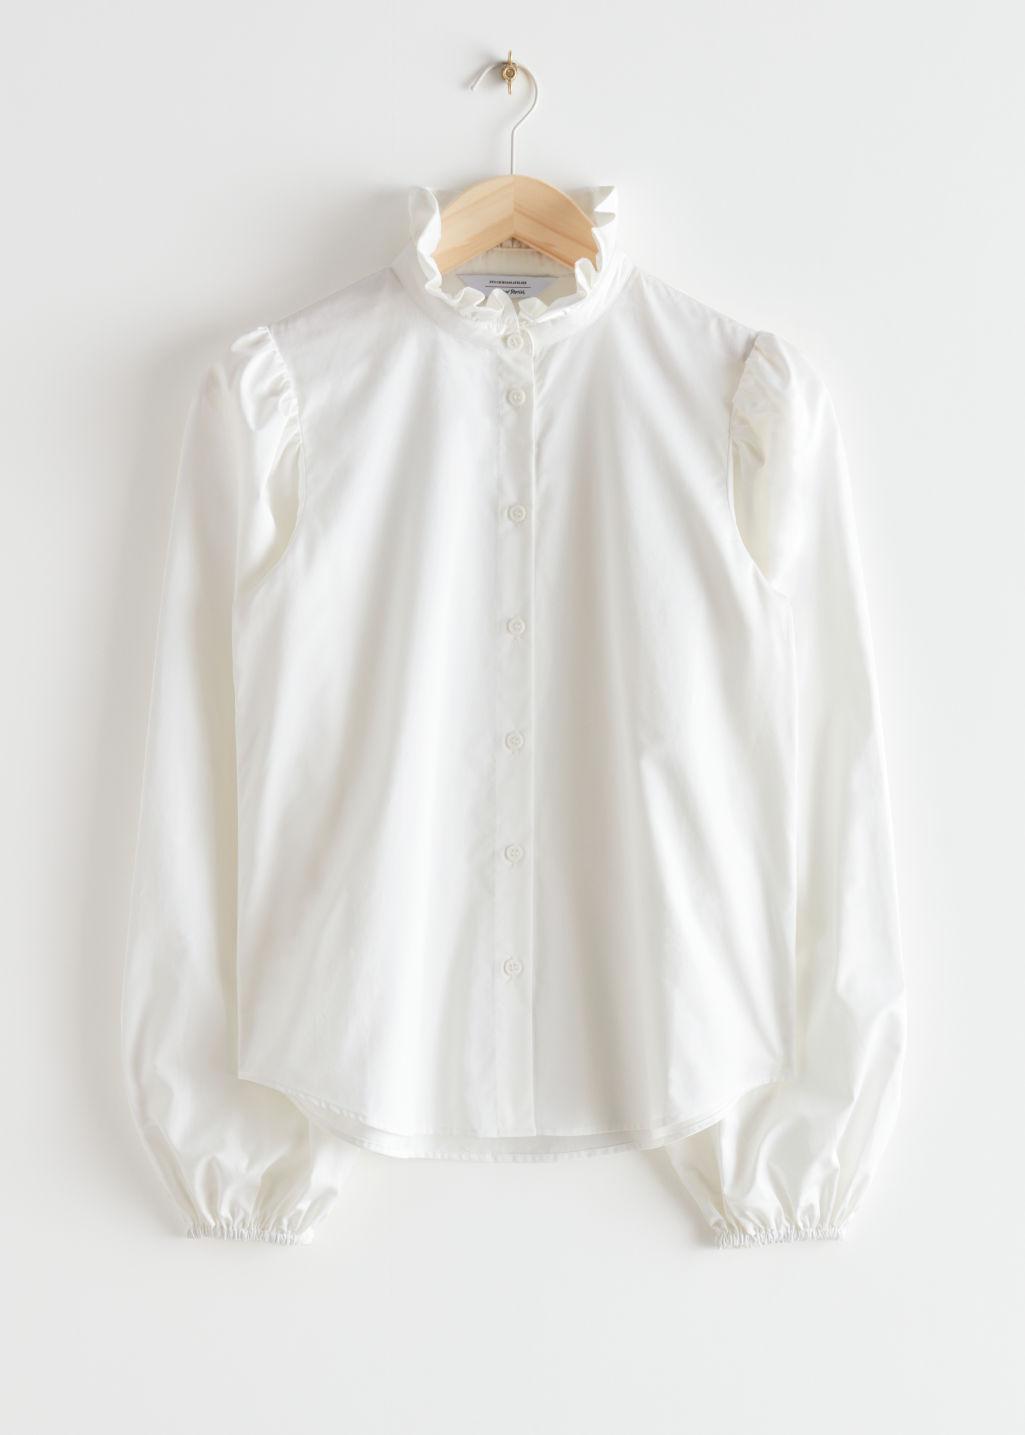 & Other Stories Frill Collar Blouse in White | Lyst